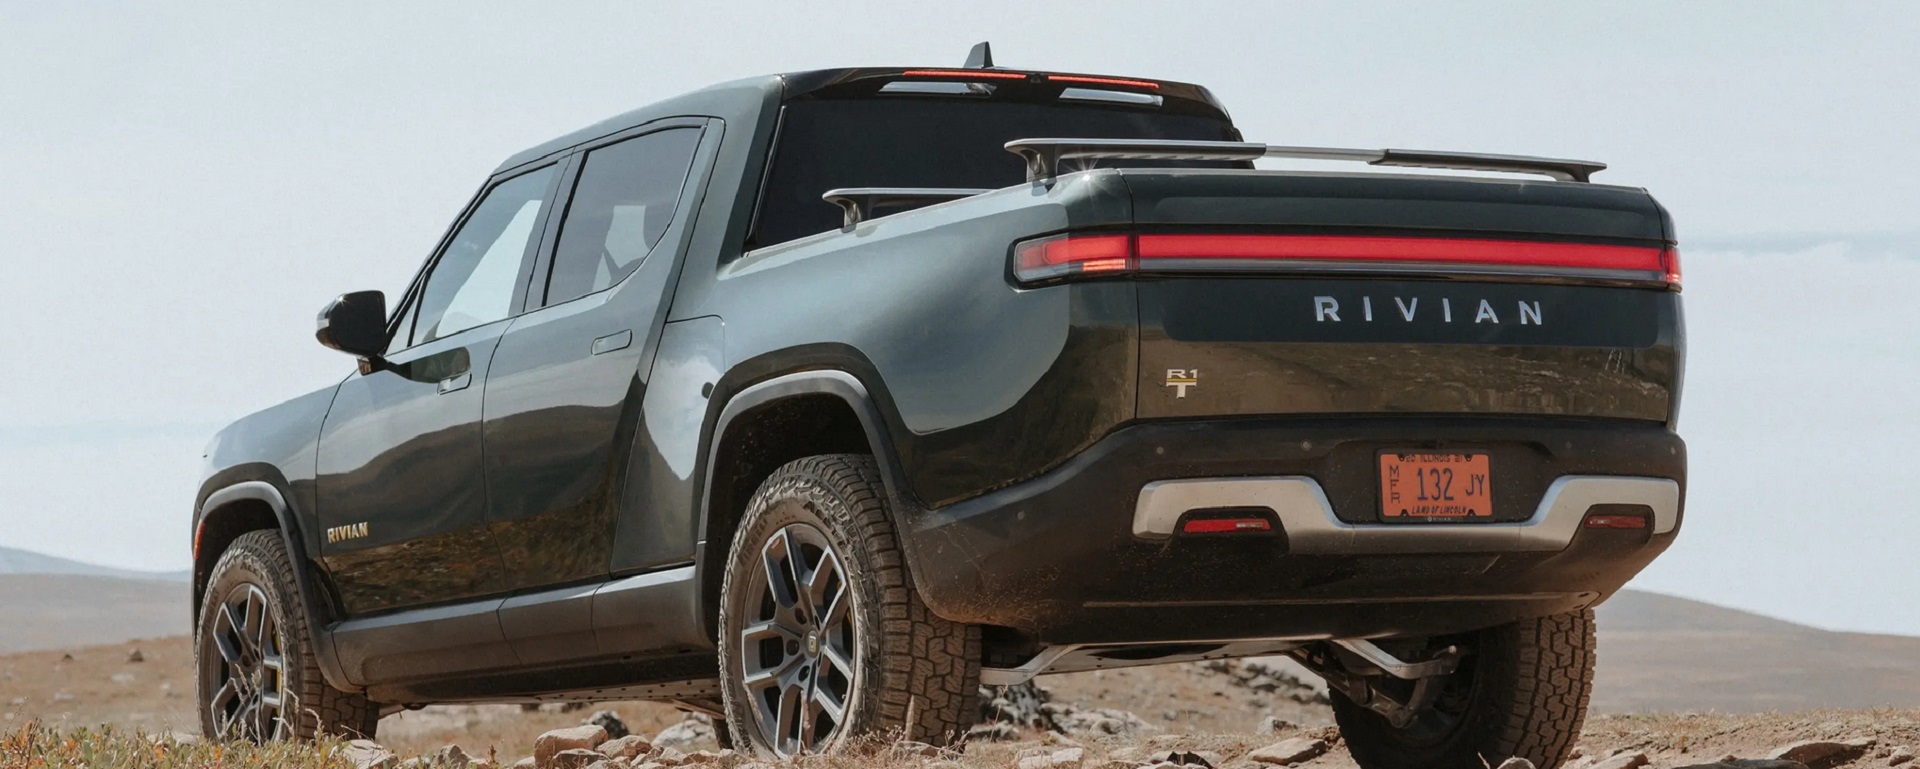 Photo of the Rivian R1T - an electric vehicle that CAN be flat-towed behind a motorhome